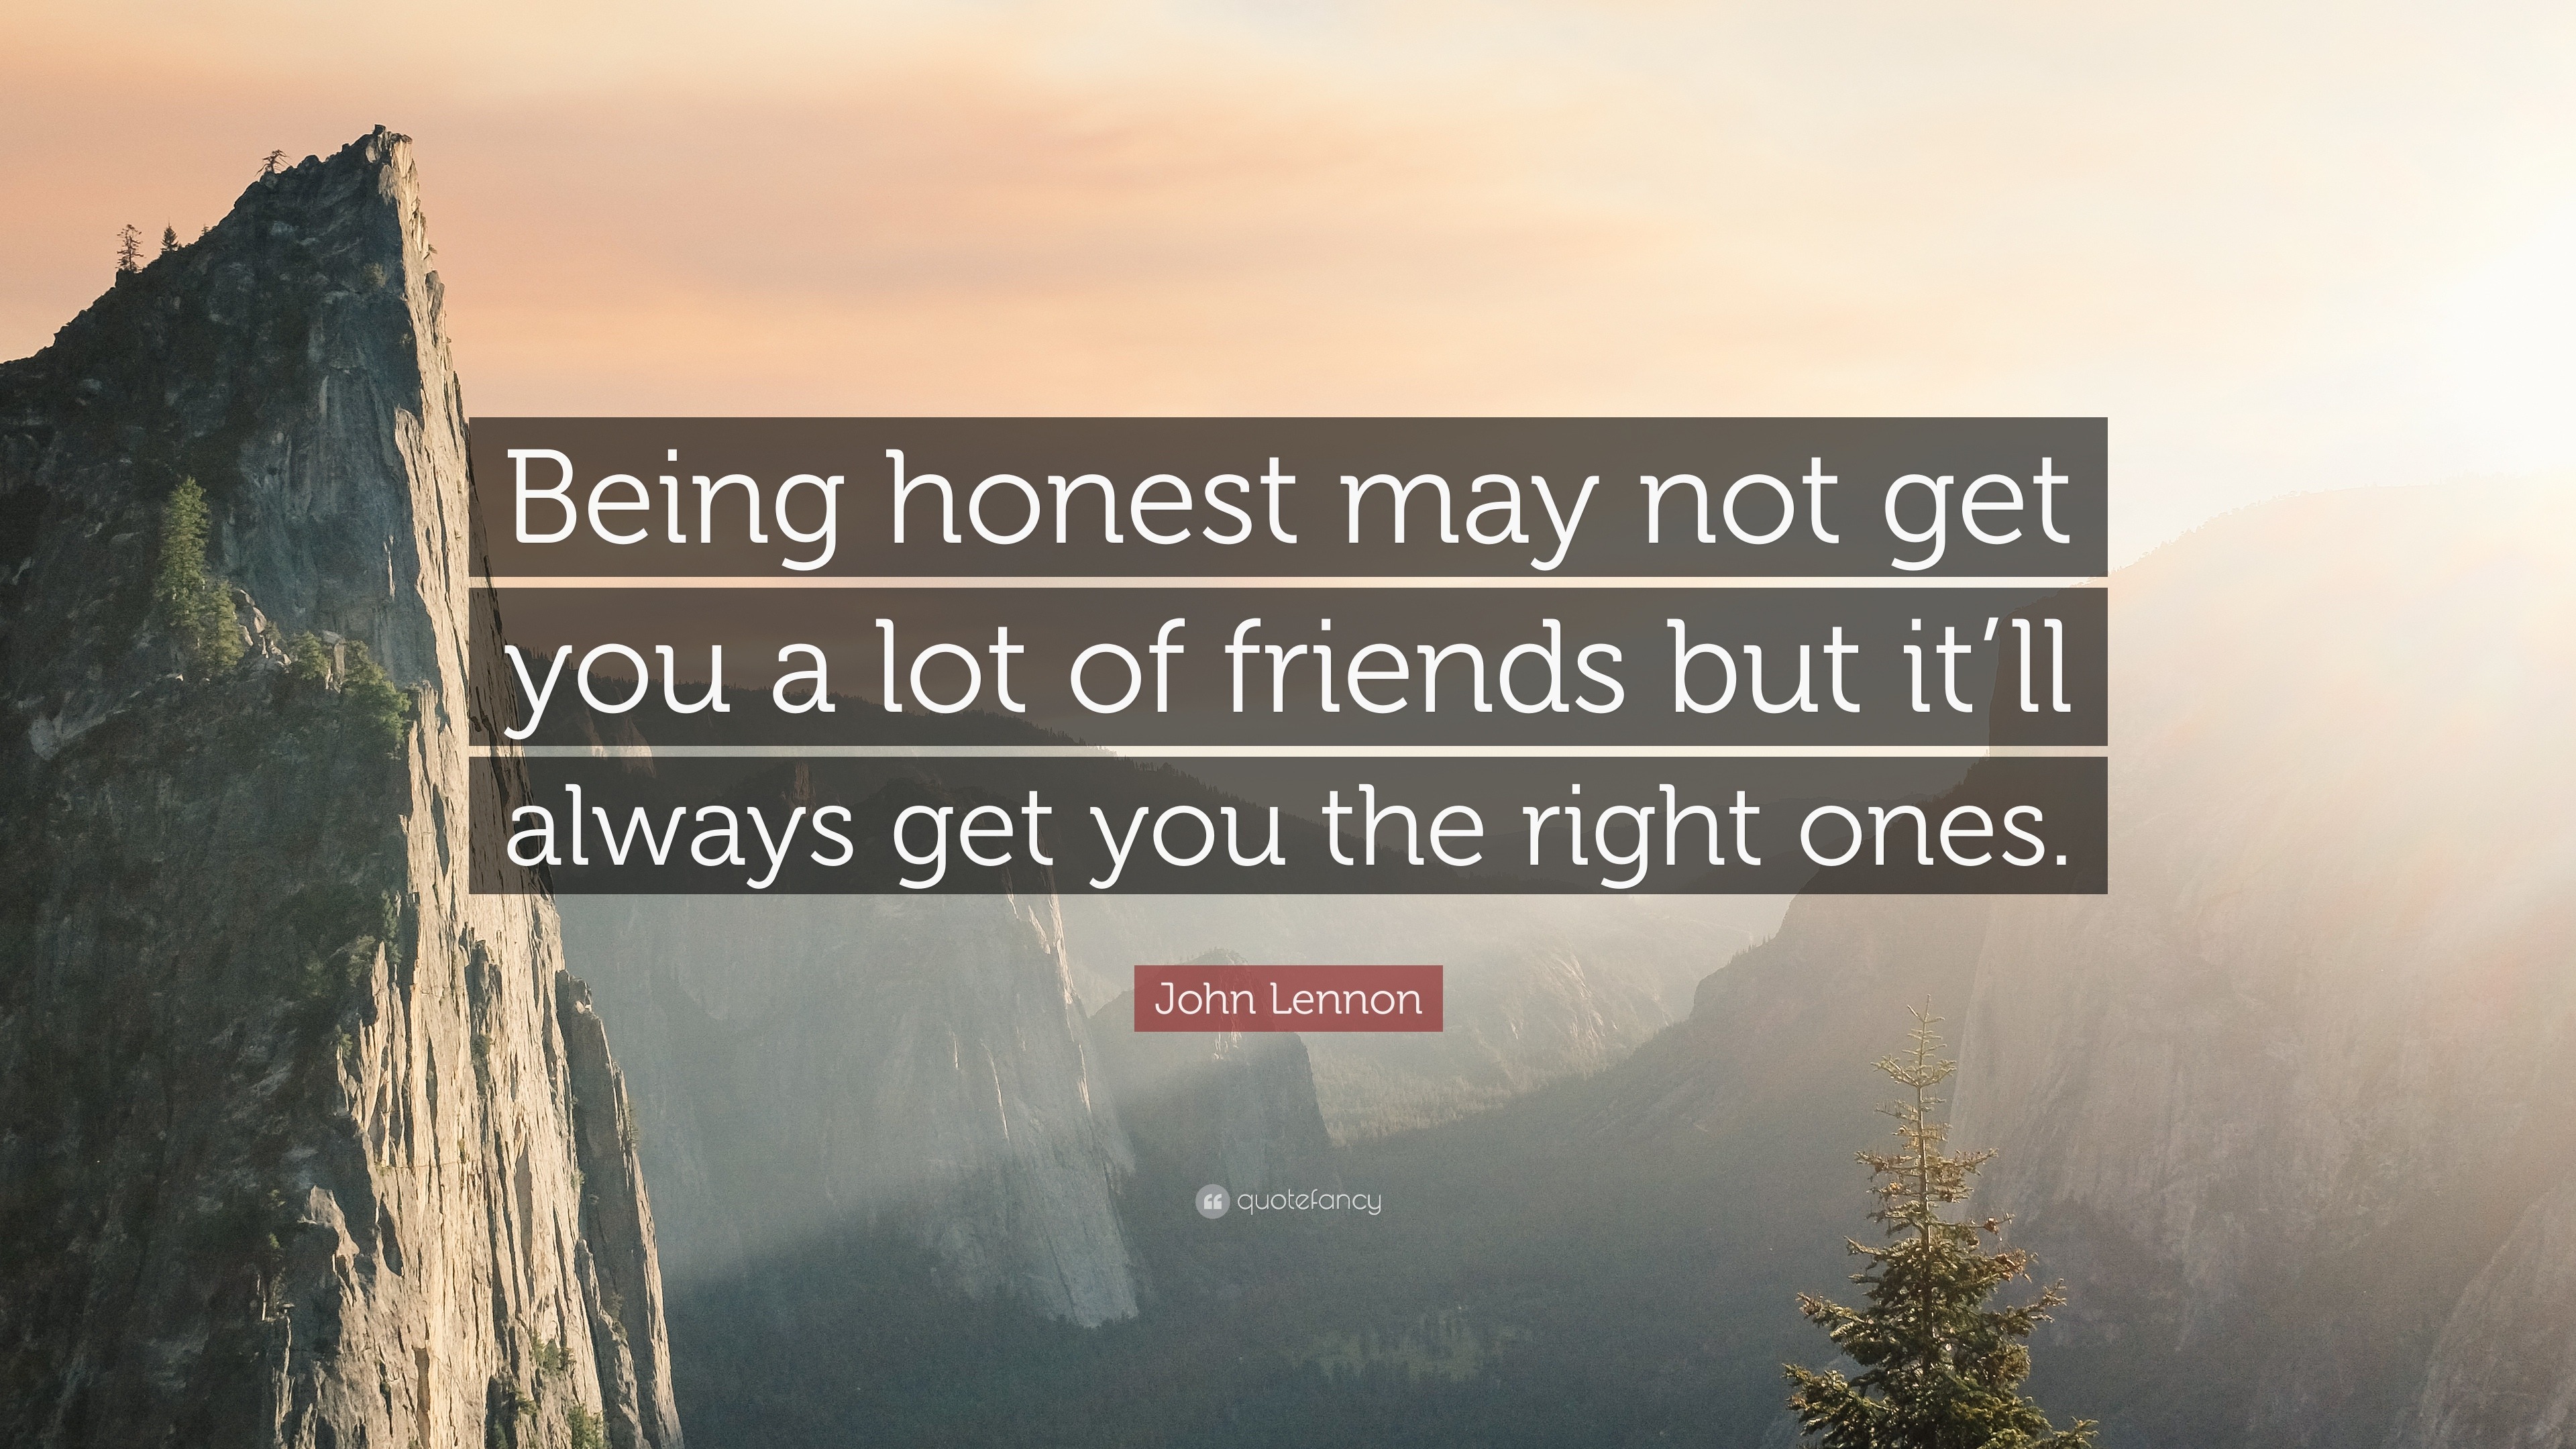 John Lennon Quote: “Being honest may not get you a lot of friends but